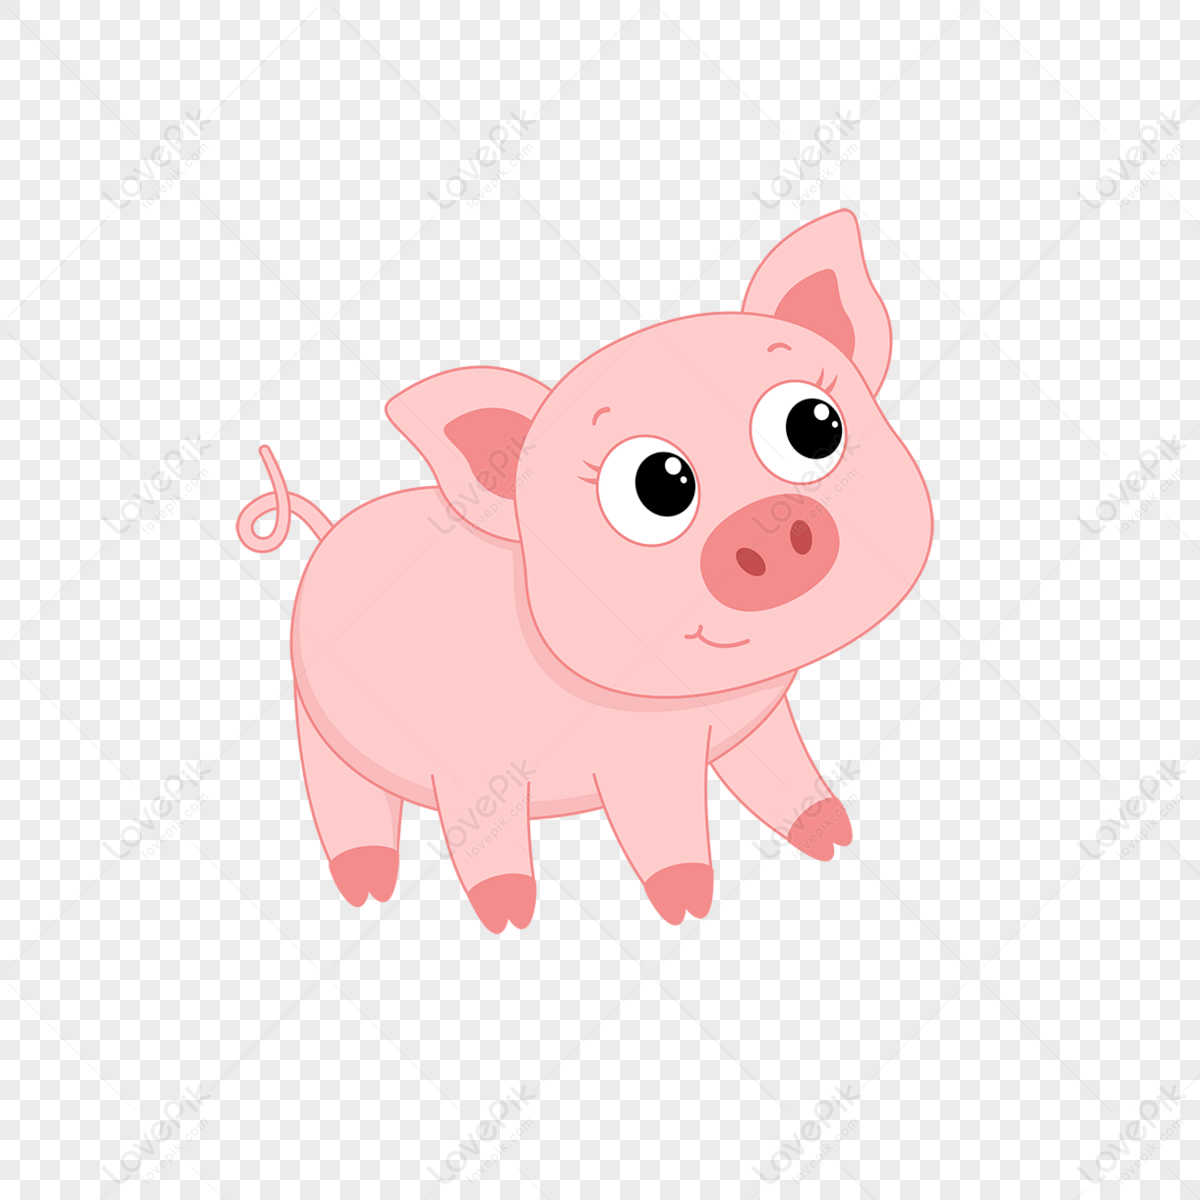 Cartoon material funny vector animal pink playing pig pig clipart,character,born baby png image free download